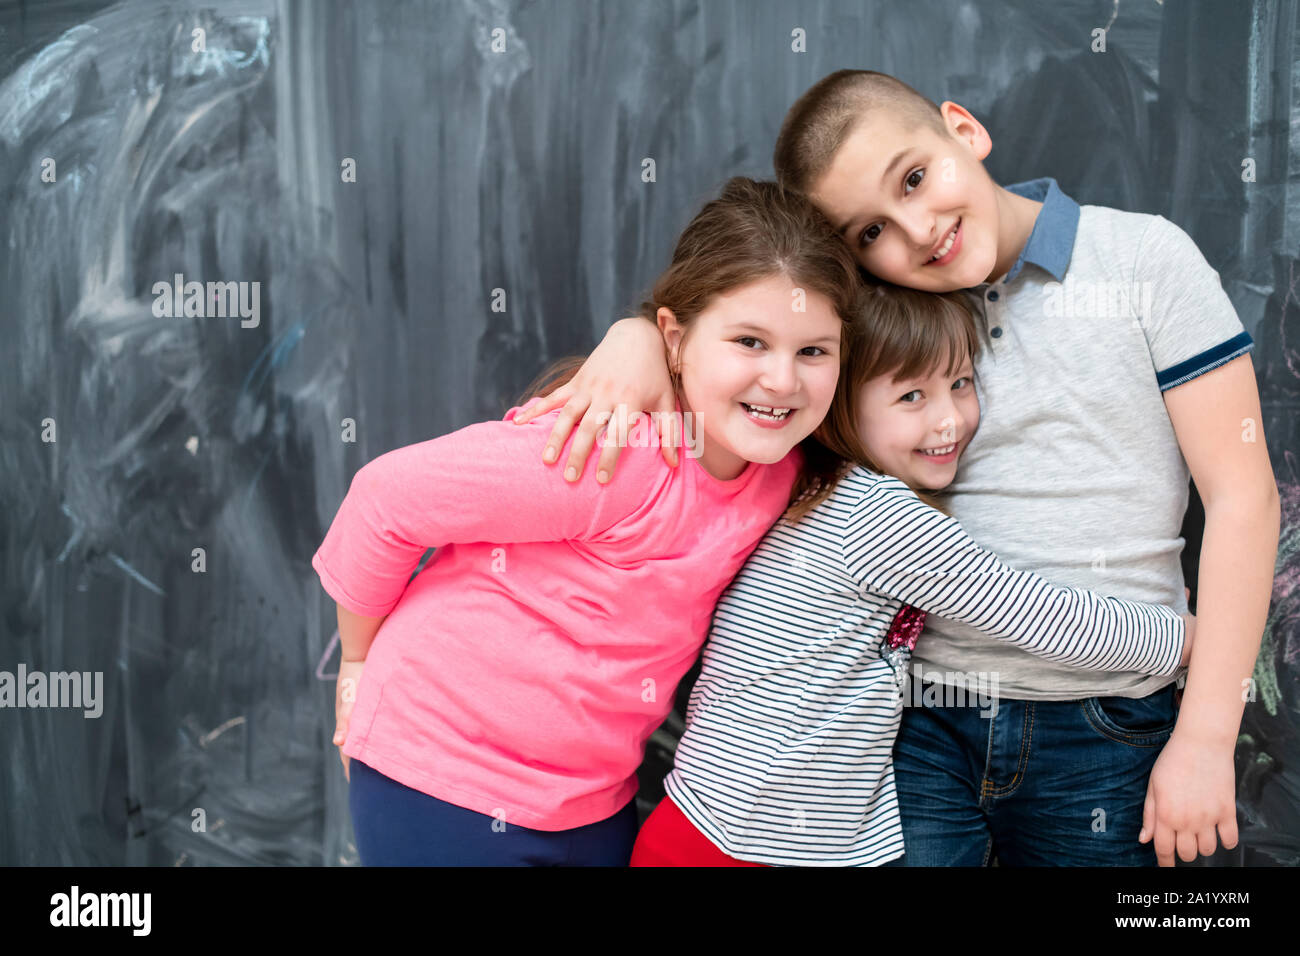 group portrait of happy kids hugging each other while having fun in front of black chalkboard Stock Photo